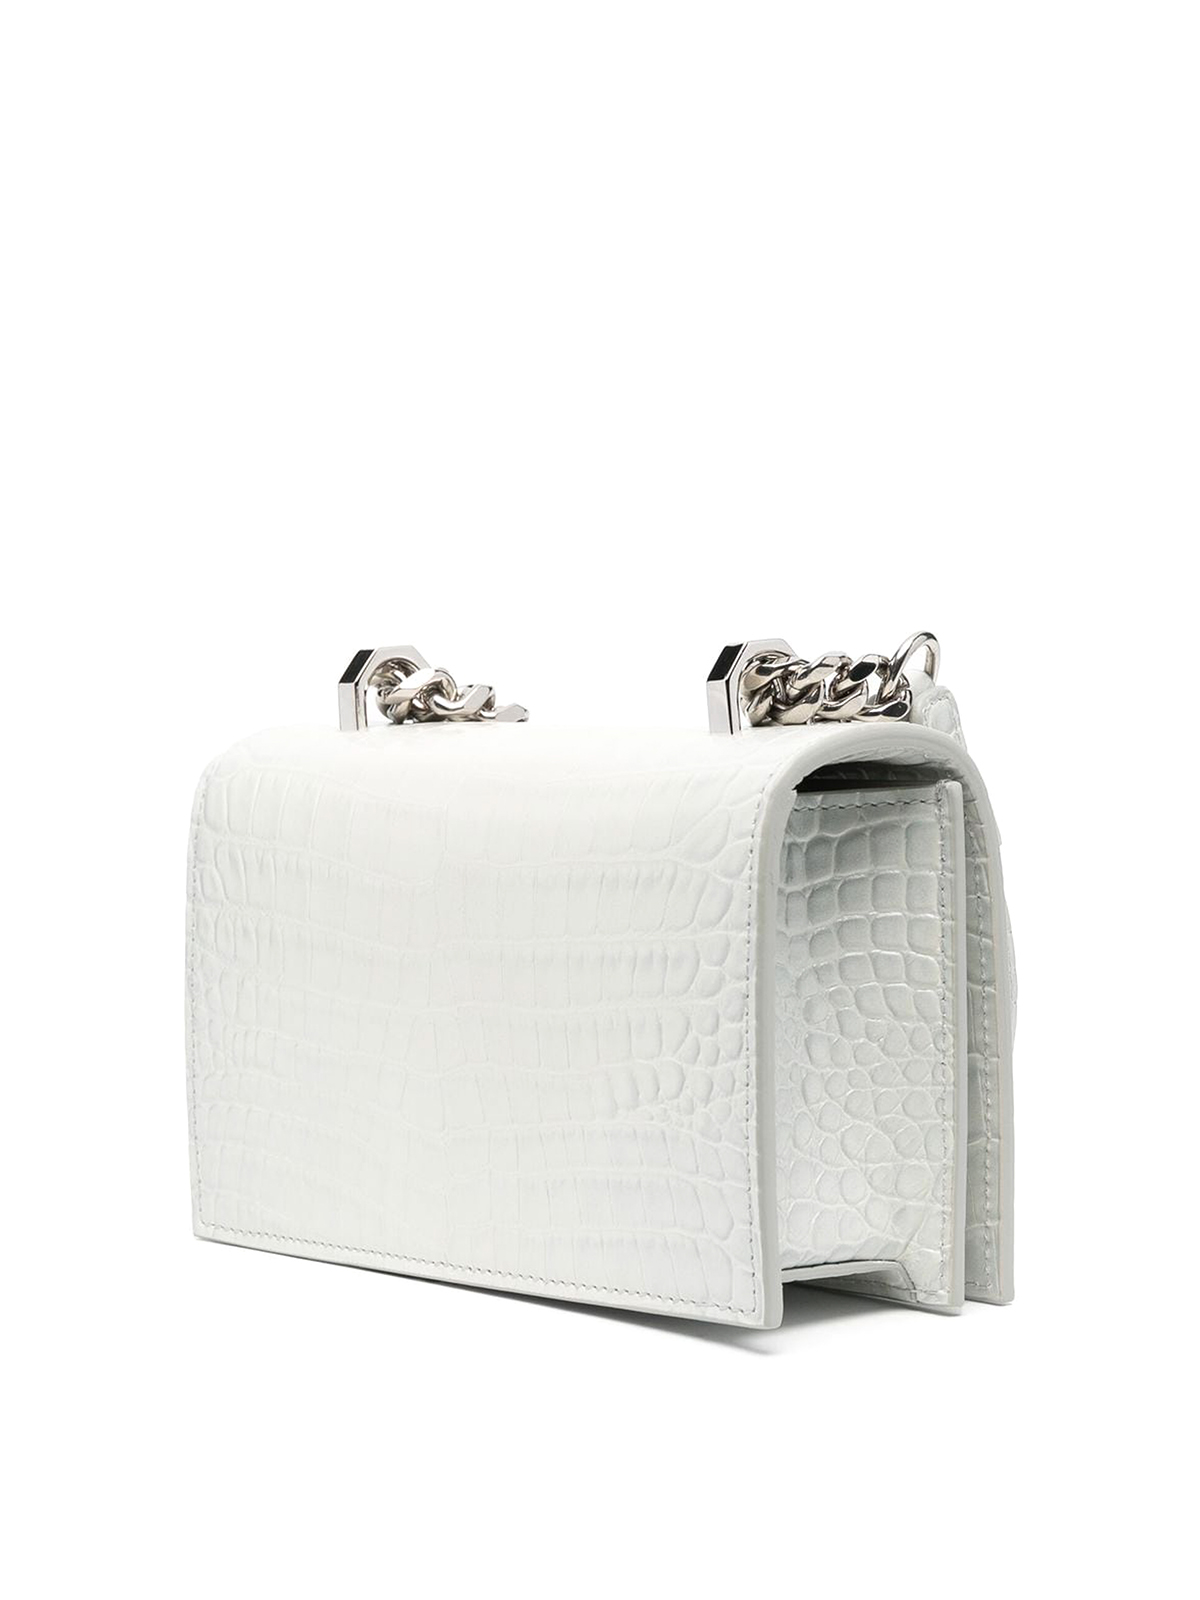 Alexander McQueen Four Ring Embellished Clutch